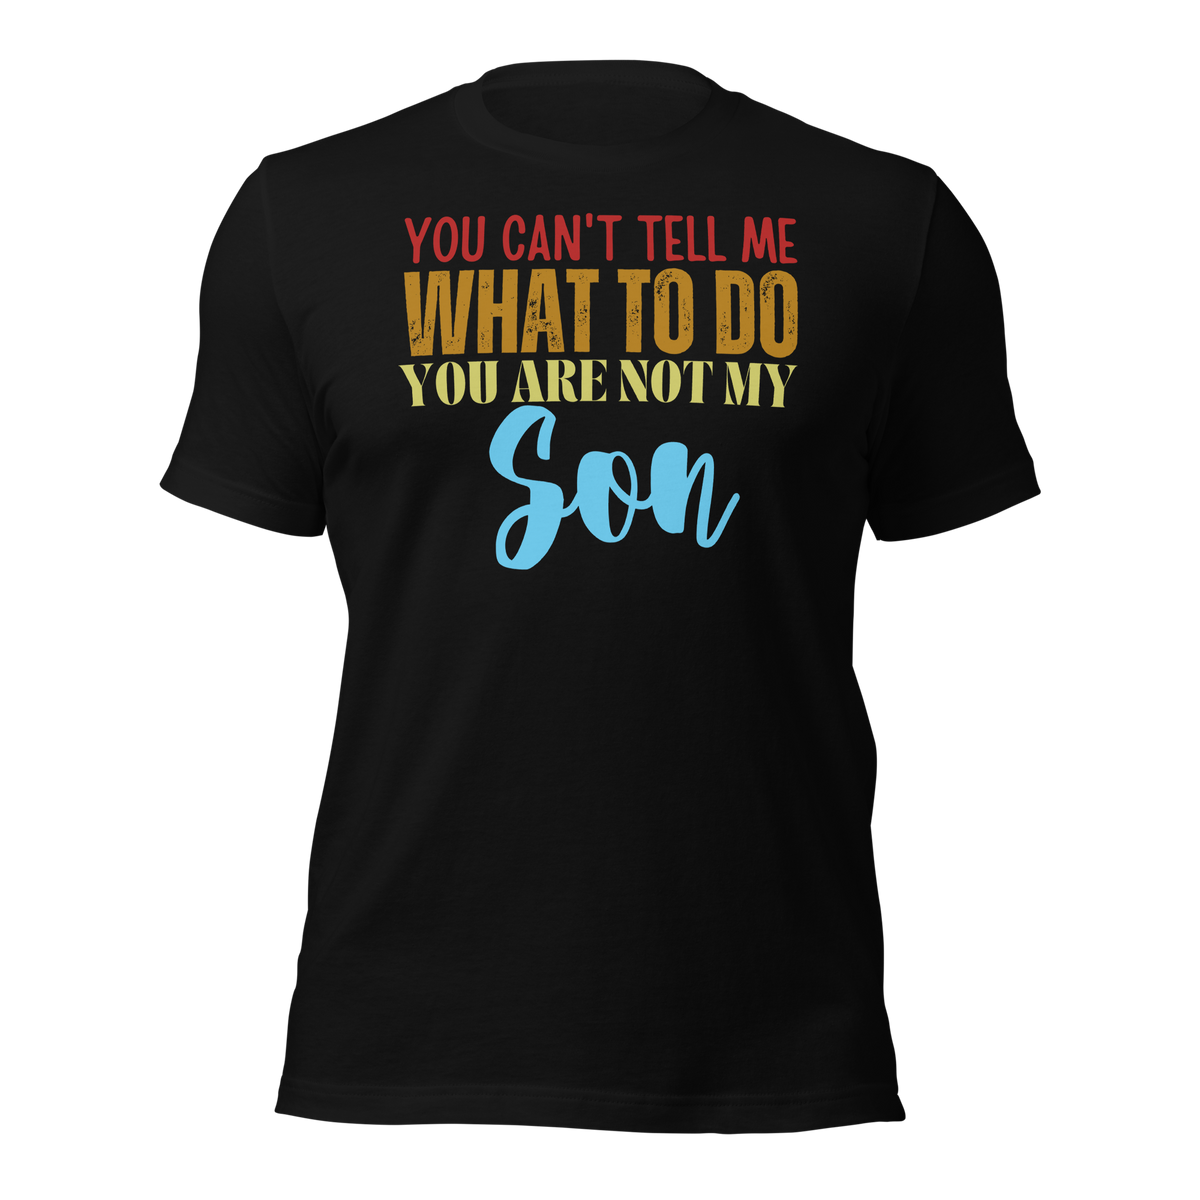 Dad Shirt, Fathers Day Shirt, Funny Mens Shirt, Funny Dad Shirt, Tell me what to do, Gift for him, Gift for her, New Papa Gift, Funny Mom Shirt, Mom Shirt, New Dad Shirt, Father Shirt, Dad tee, You Can't tell me What To Do You Are Not My son Shirt, T-Shirt, tee